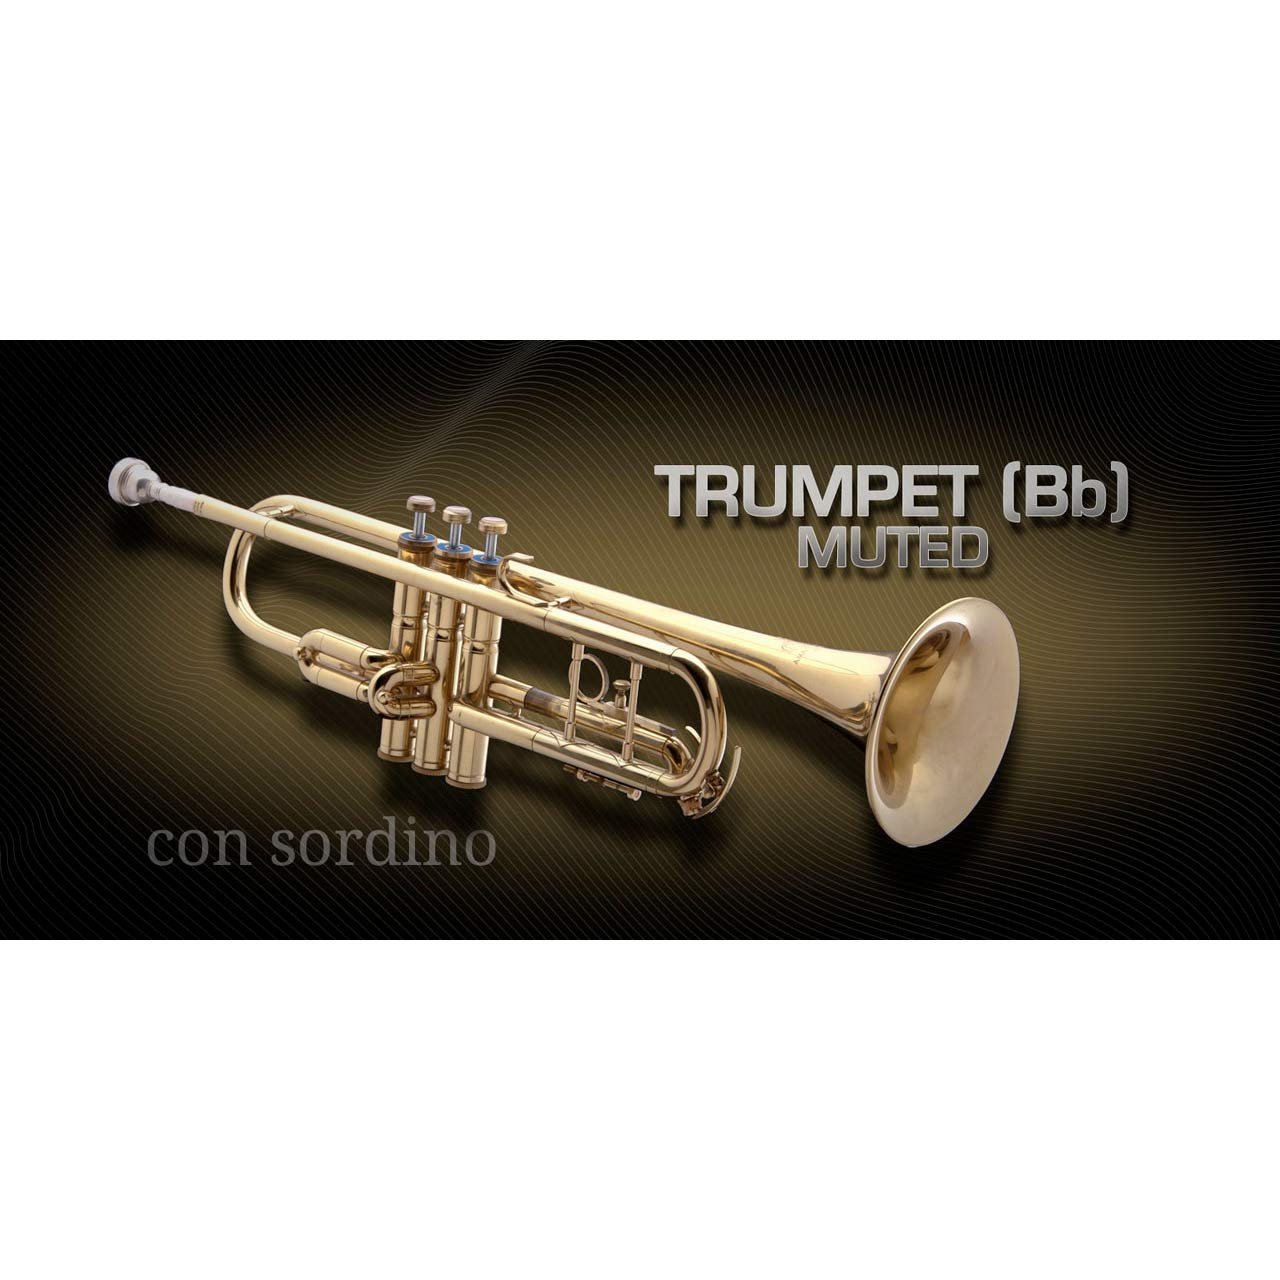 Software Instruments - Vienna Symphonic Library VSL - TRUMPET Bb Muted